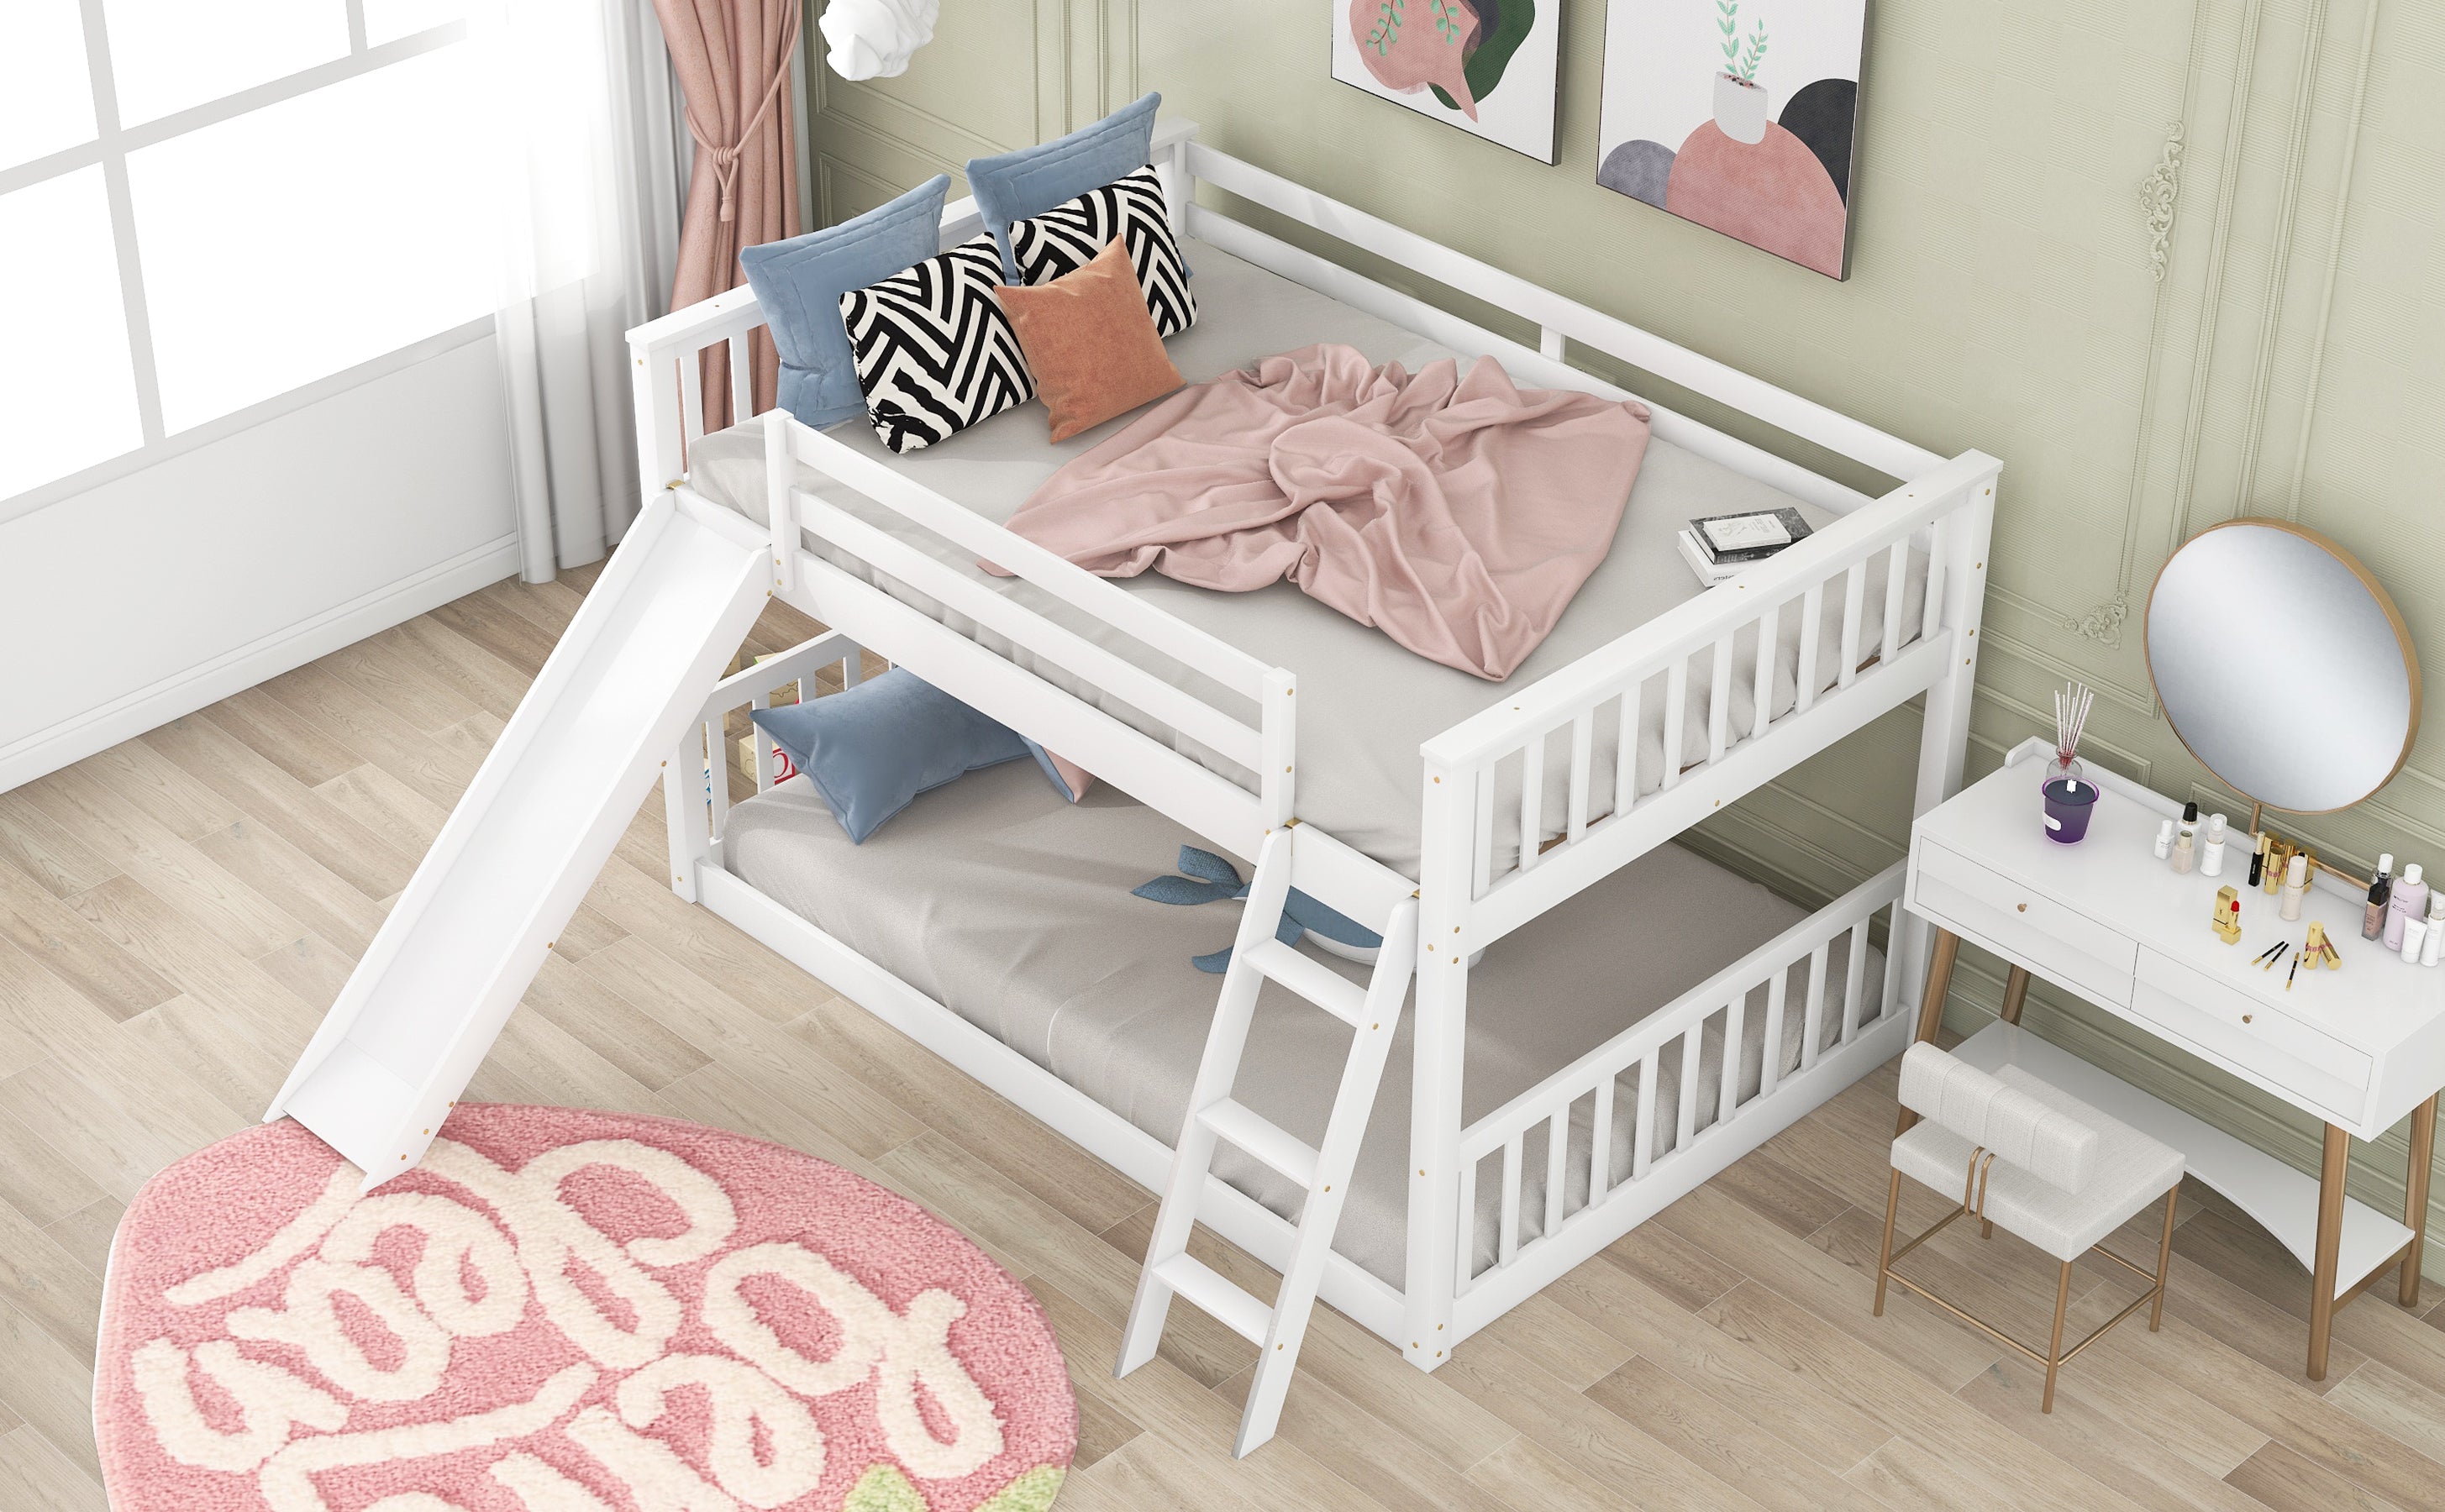 Full over Full Bunk Bed with Convertible Slide and Ladder (White)